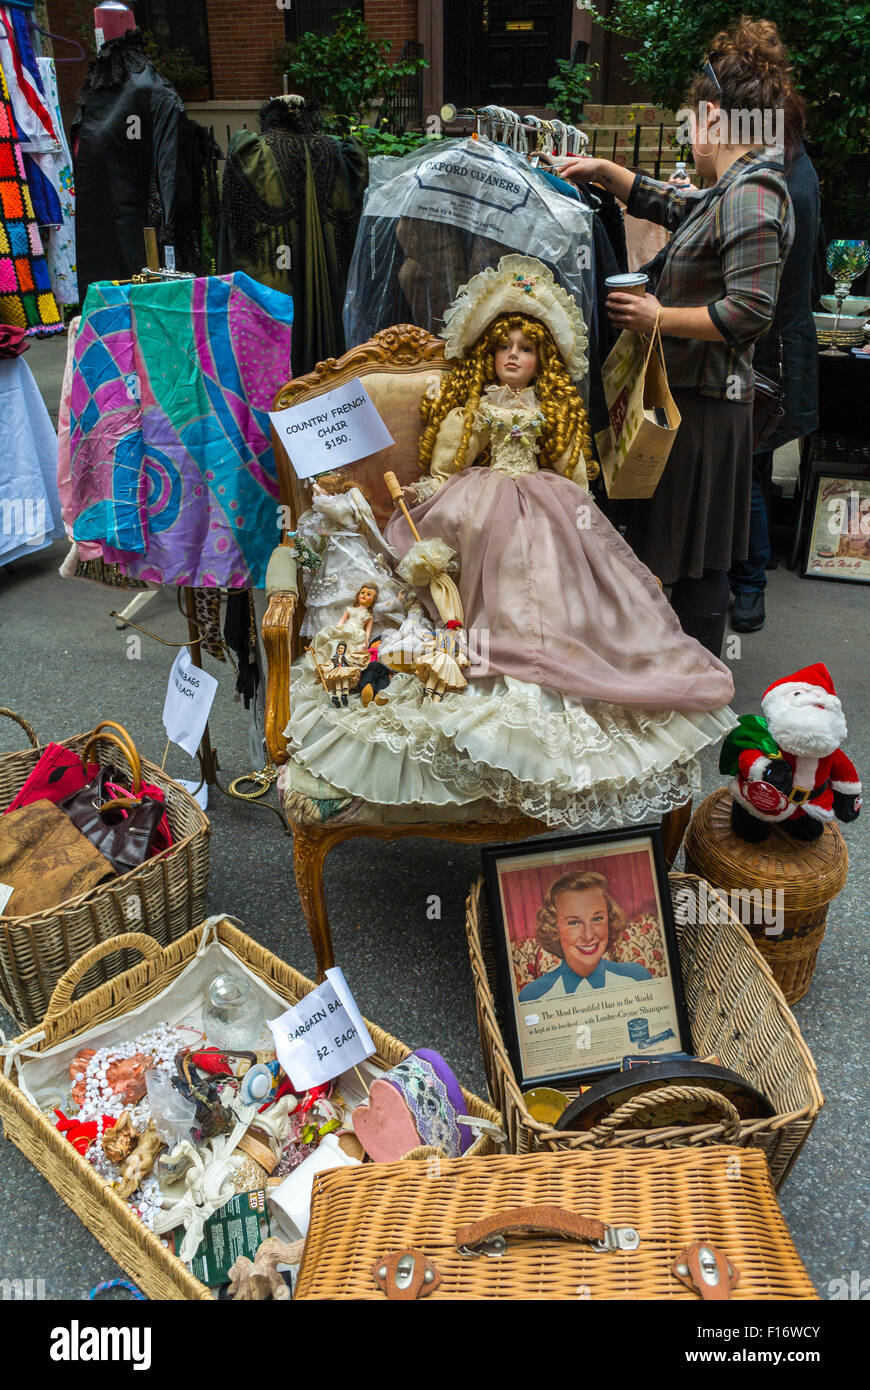 New York City, USA, Woman Shopping, Vintage Toys, Clothes on Display at Chelsea Street Flea Market, Summer Stock Photo